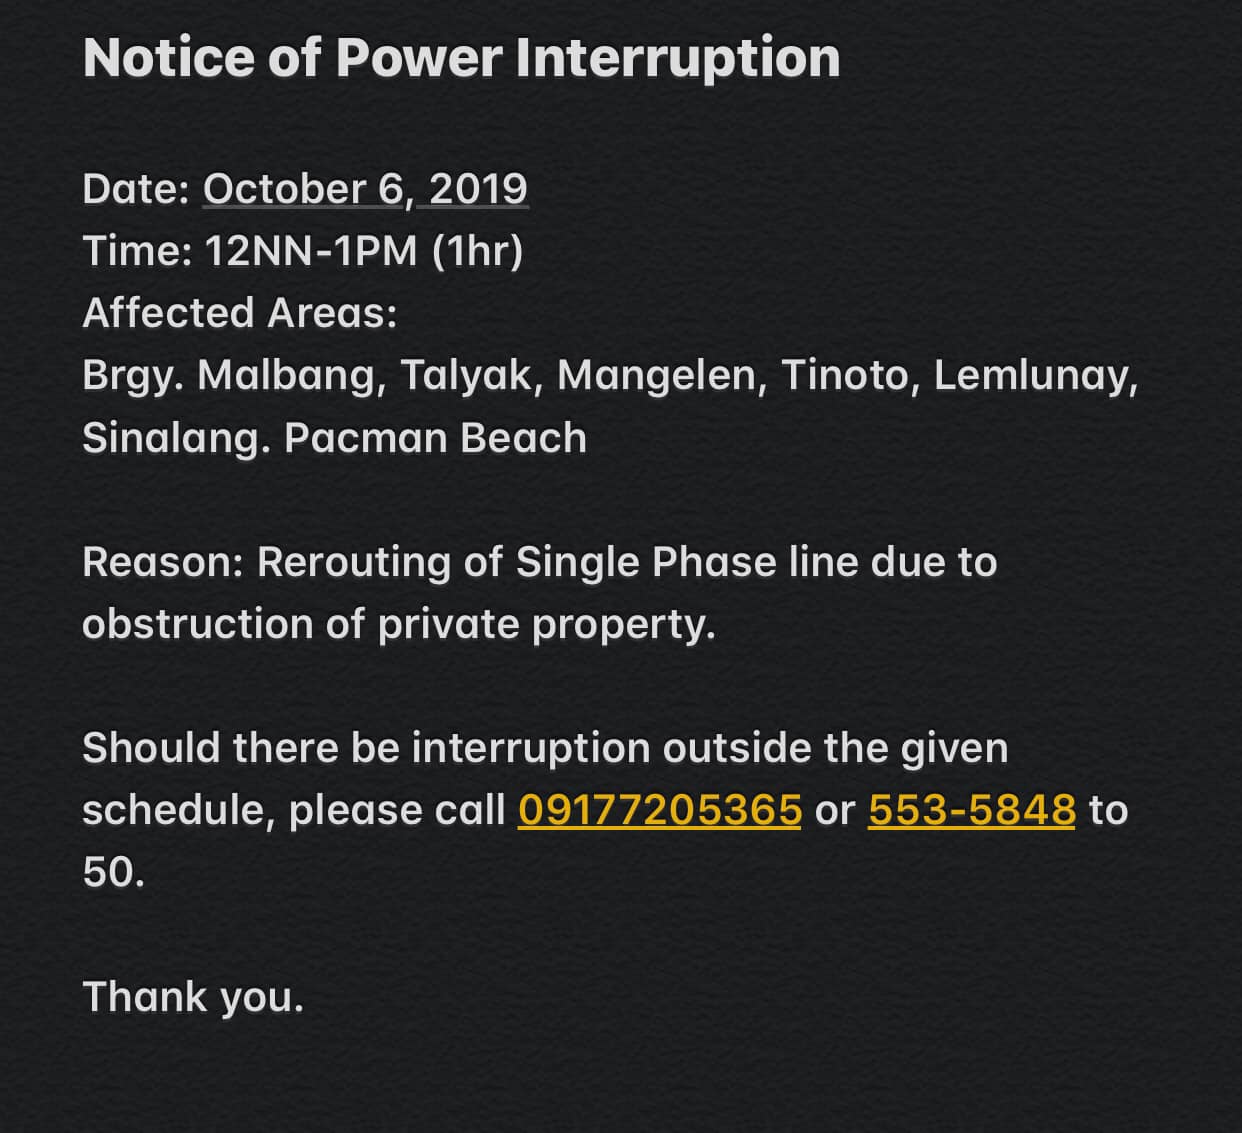 Notice of Power Interruption Date: October 6, 2019 (Sunday) Time: 12NN-1PM (1hr)